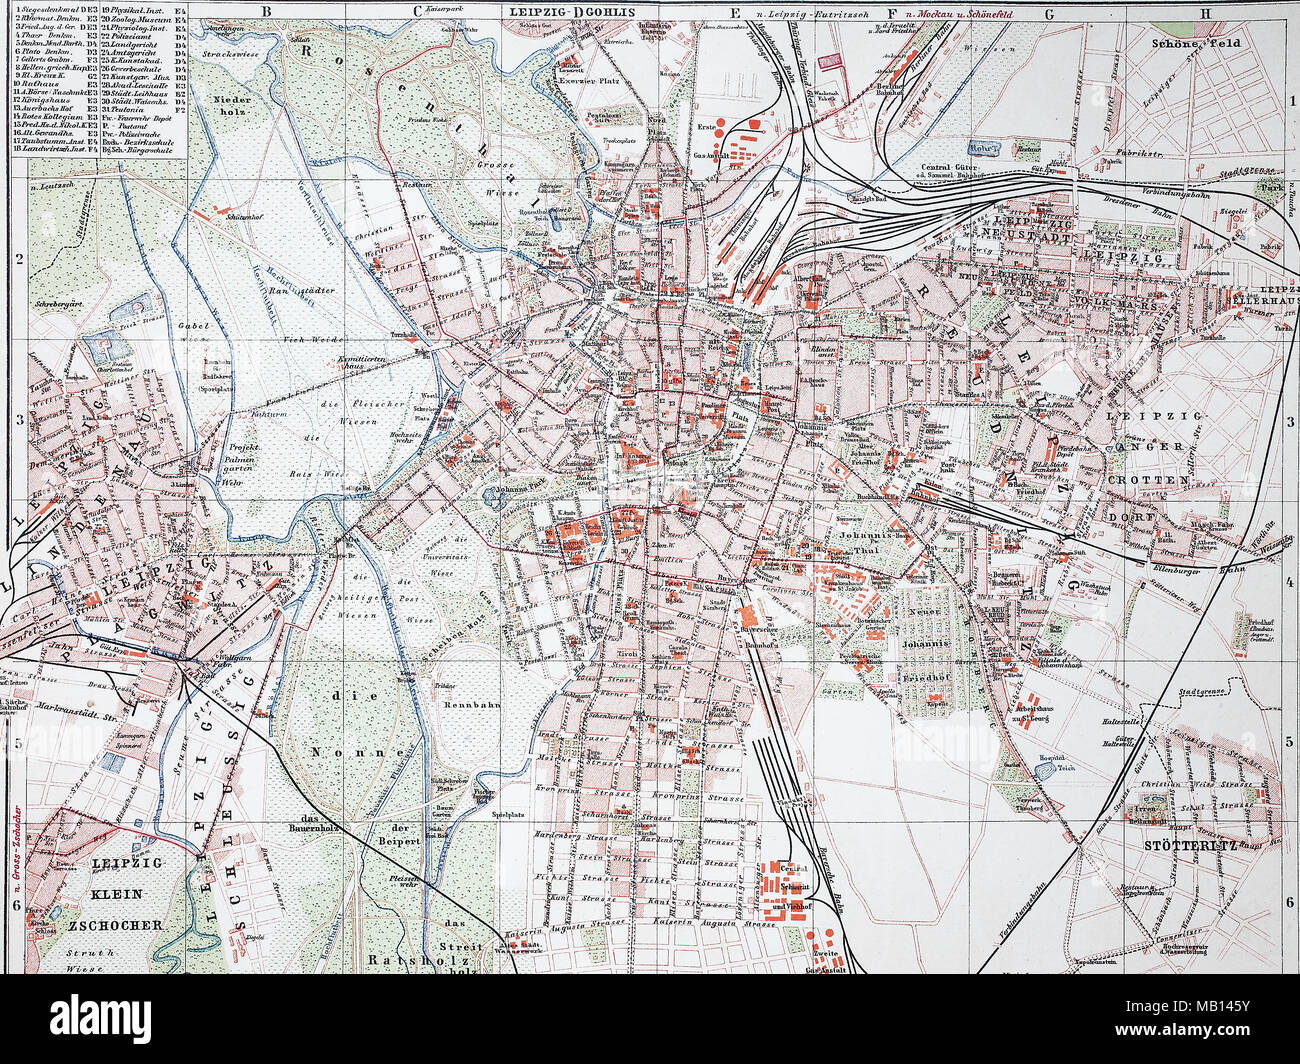 Stadtplan Von Leipzig Deutschland 15 City Map Of Leipzig Germany Digital Improved Reproduction Of An Original Print From The Year 15 Stock Photo Alamy